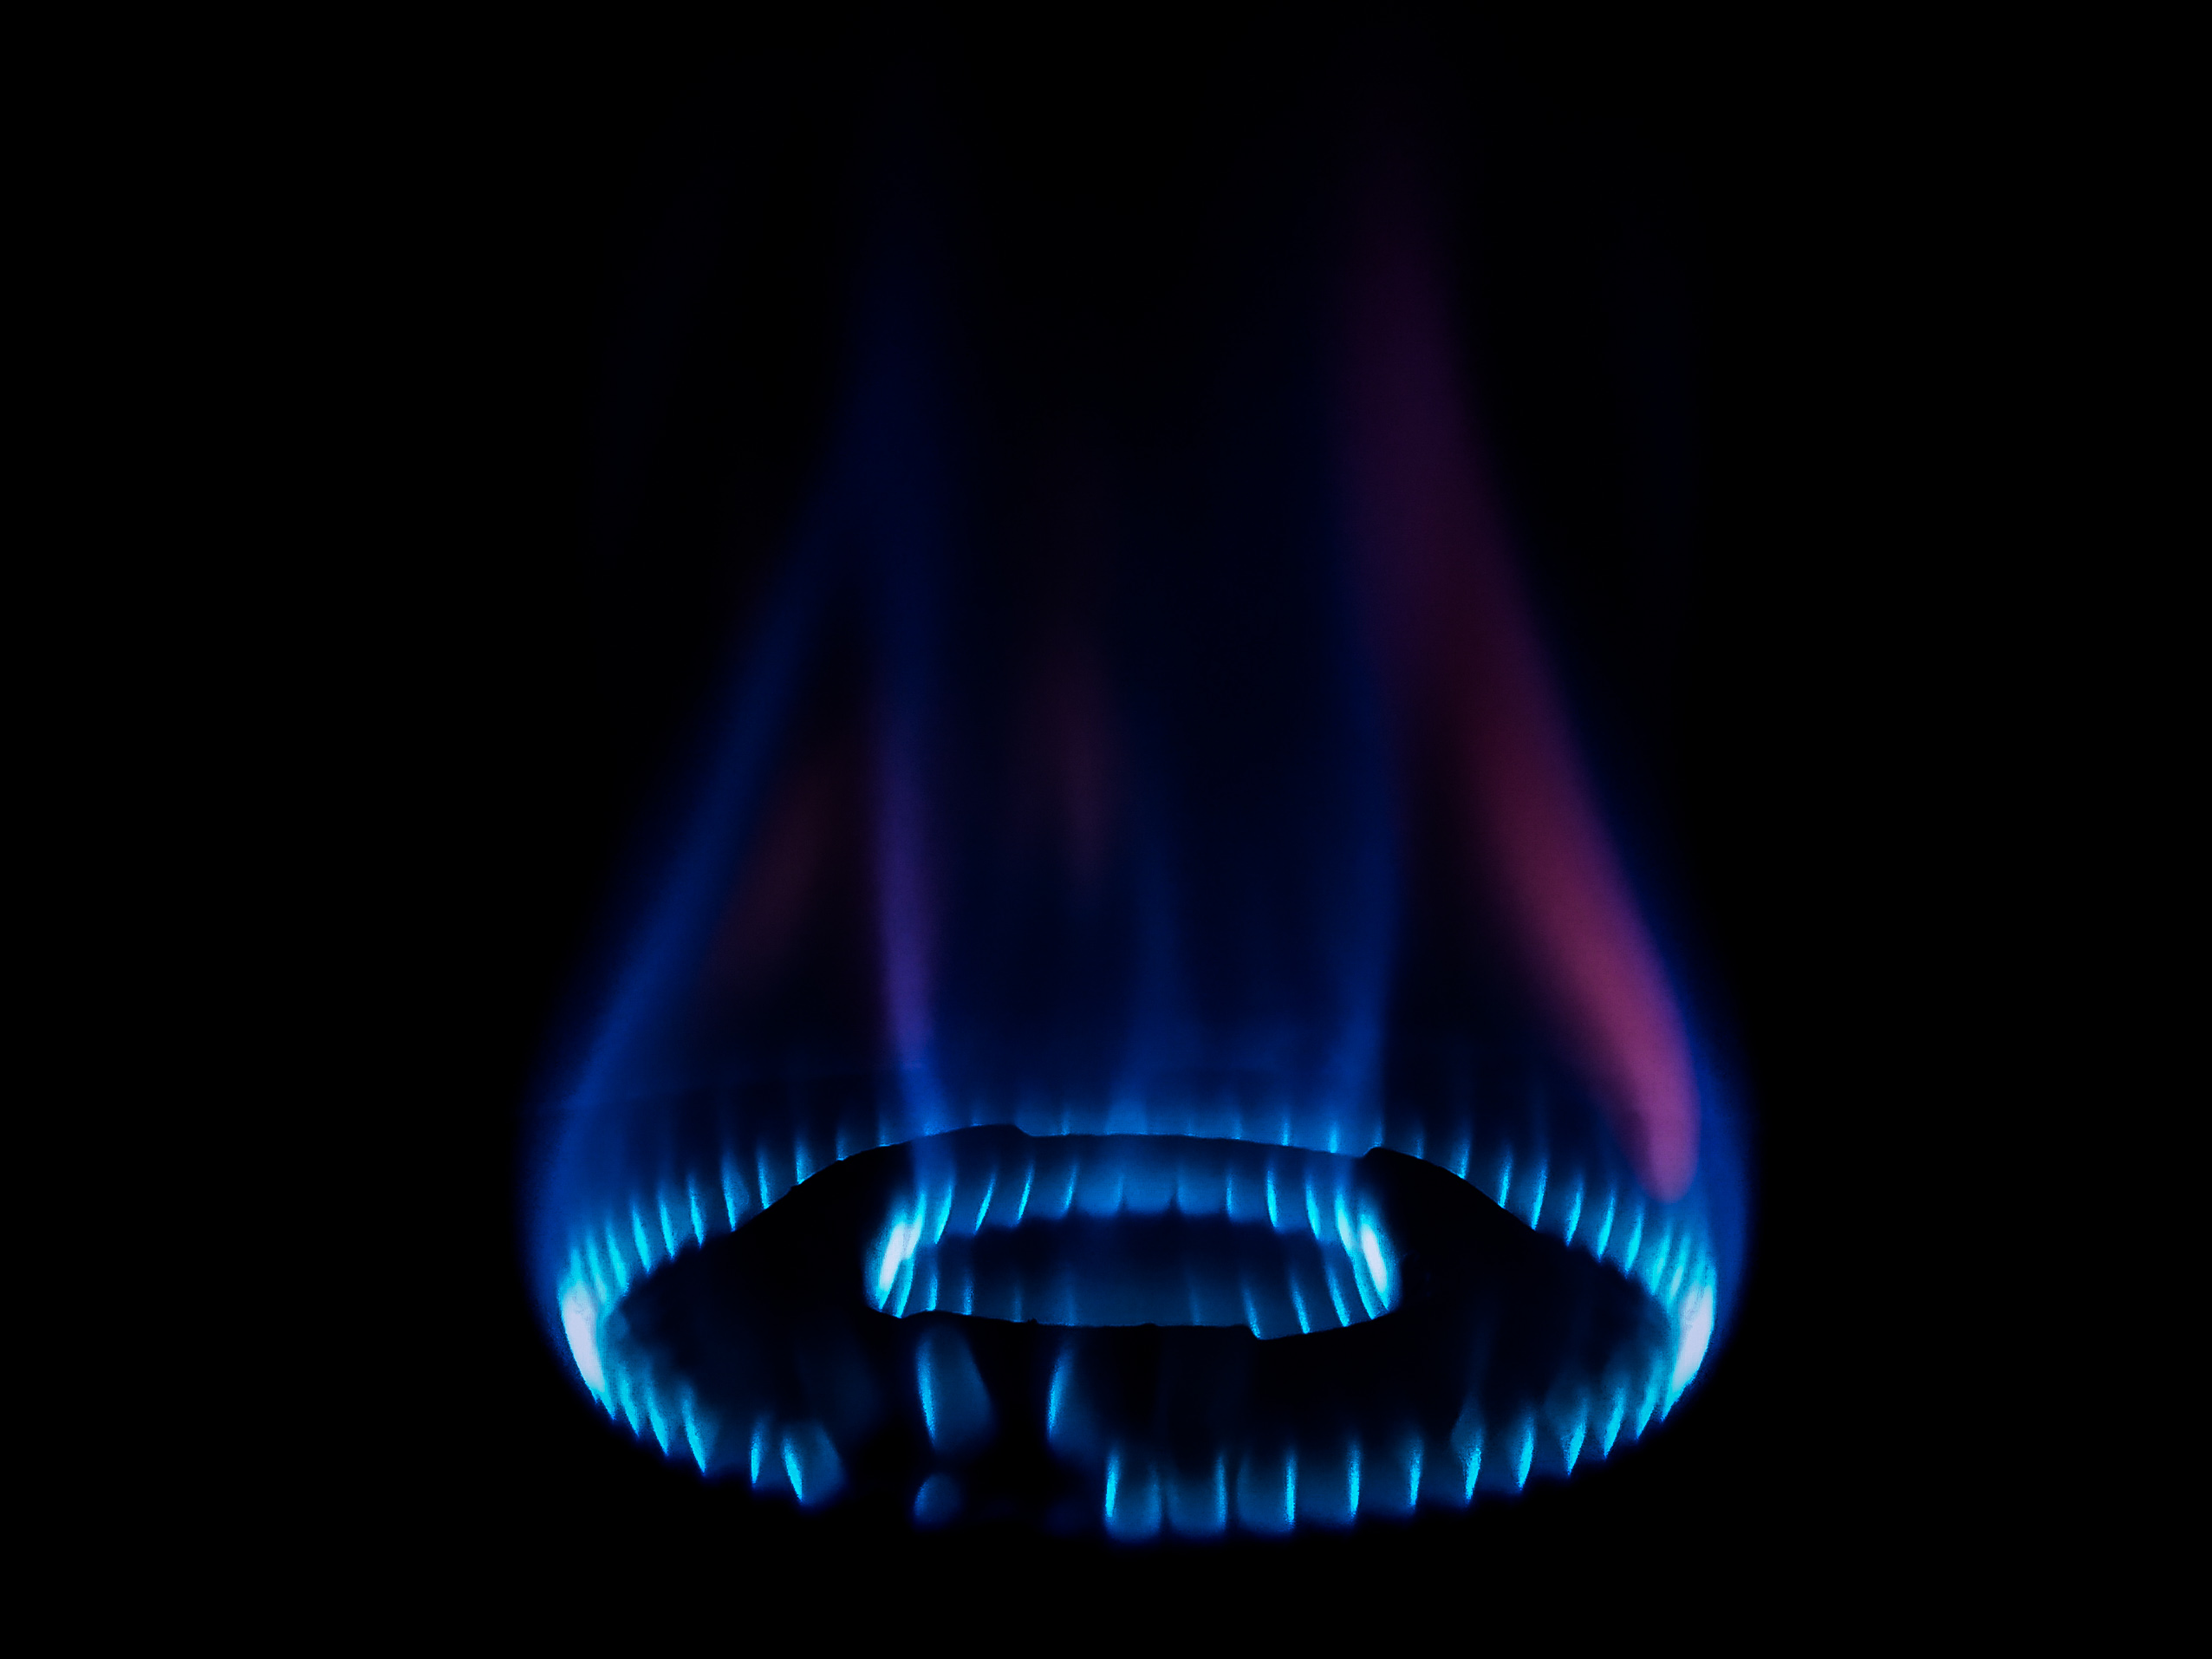 Blue Flame on Focus